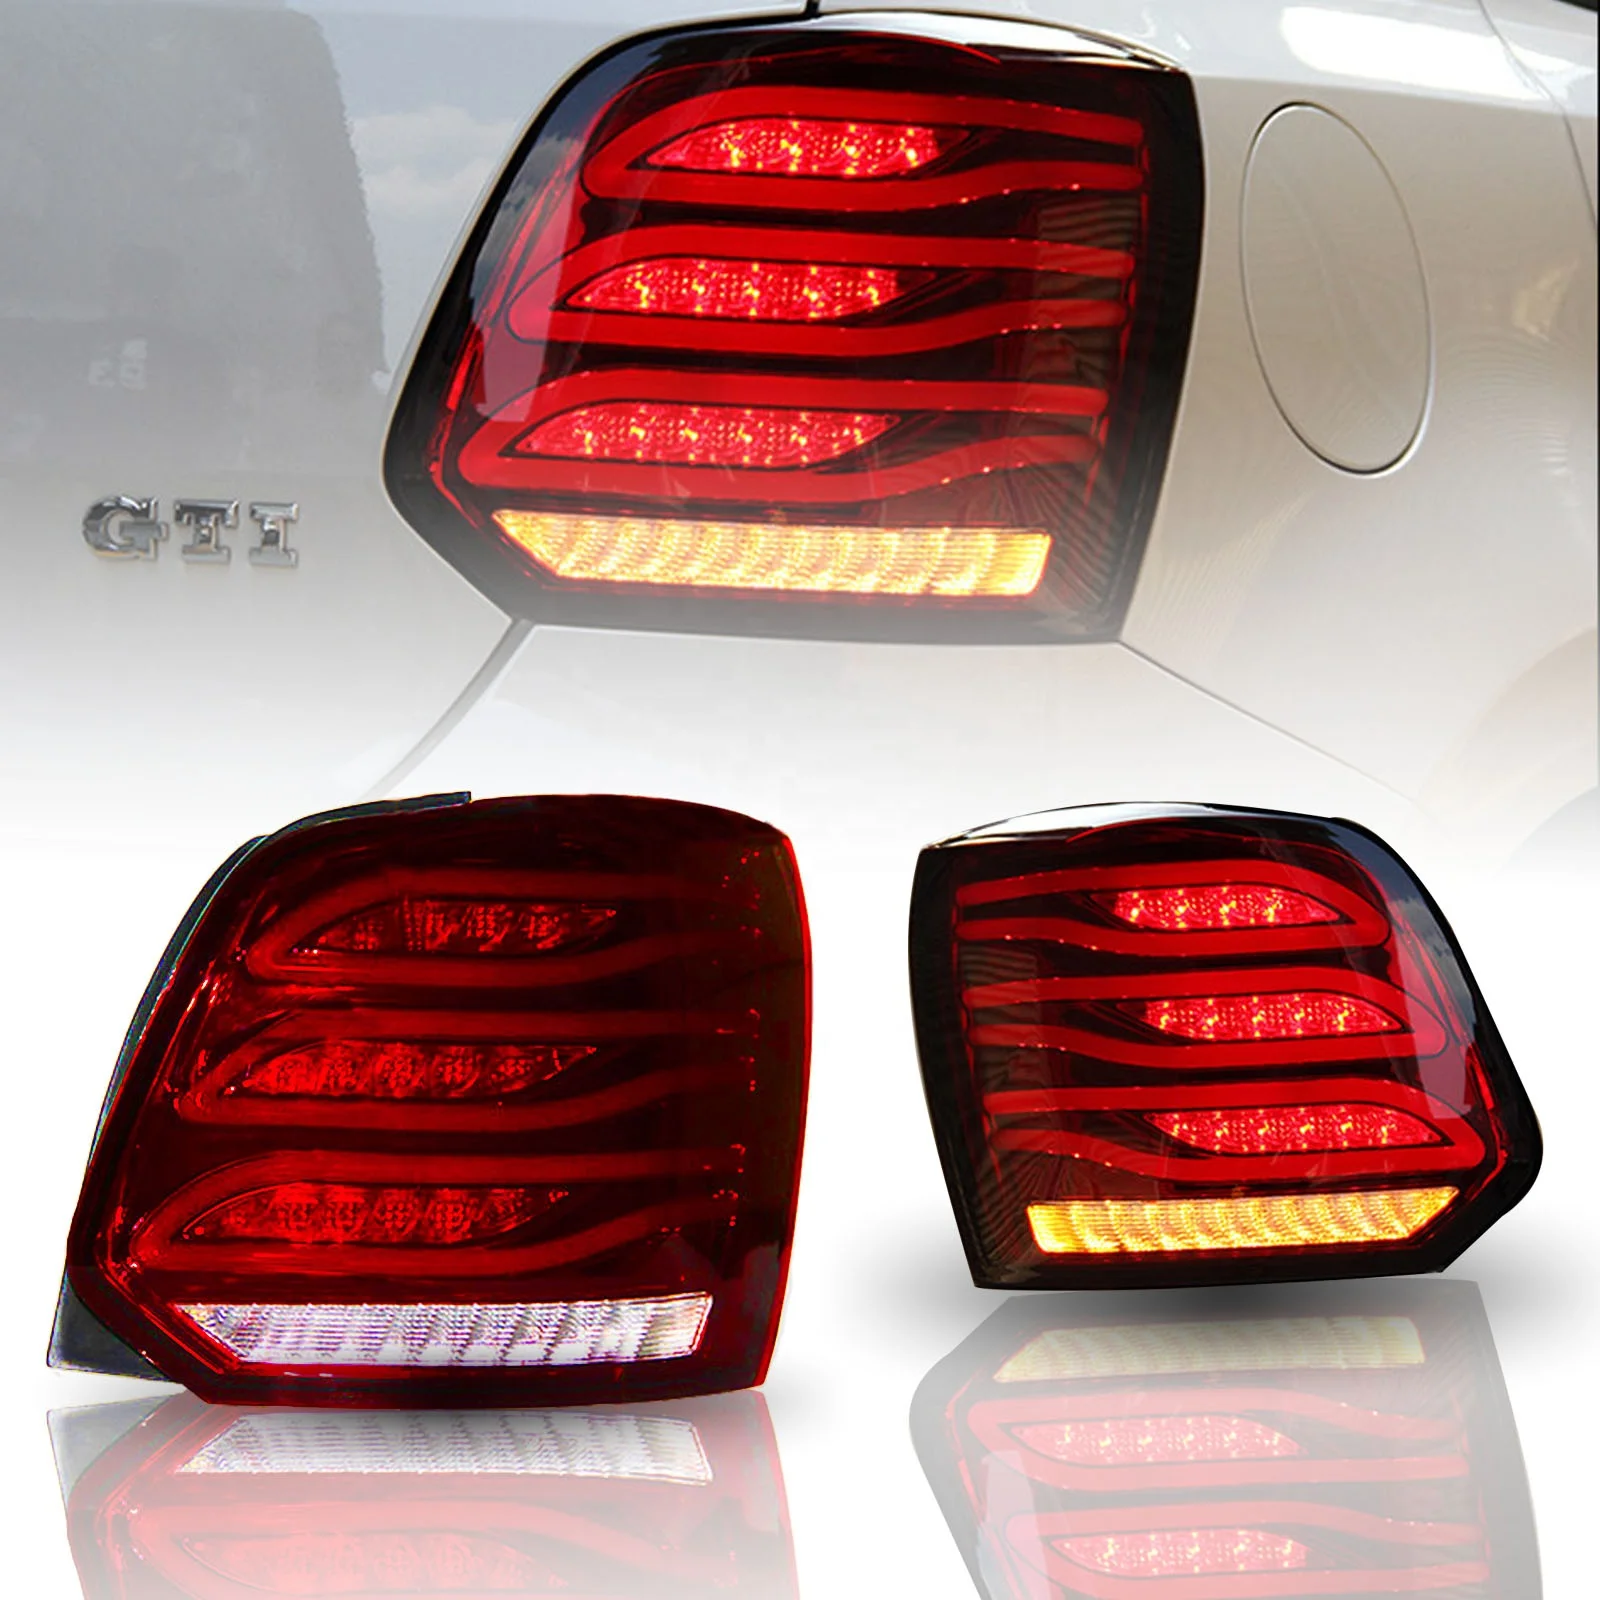 2021 Hot Sale Car Tail Lamp For Vw Polo Taillights Led Turn Signal Brake Reverse Lights (1600514104952)